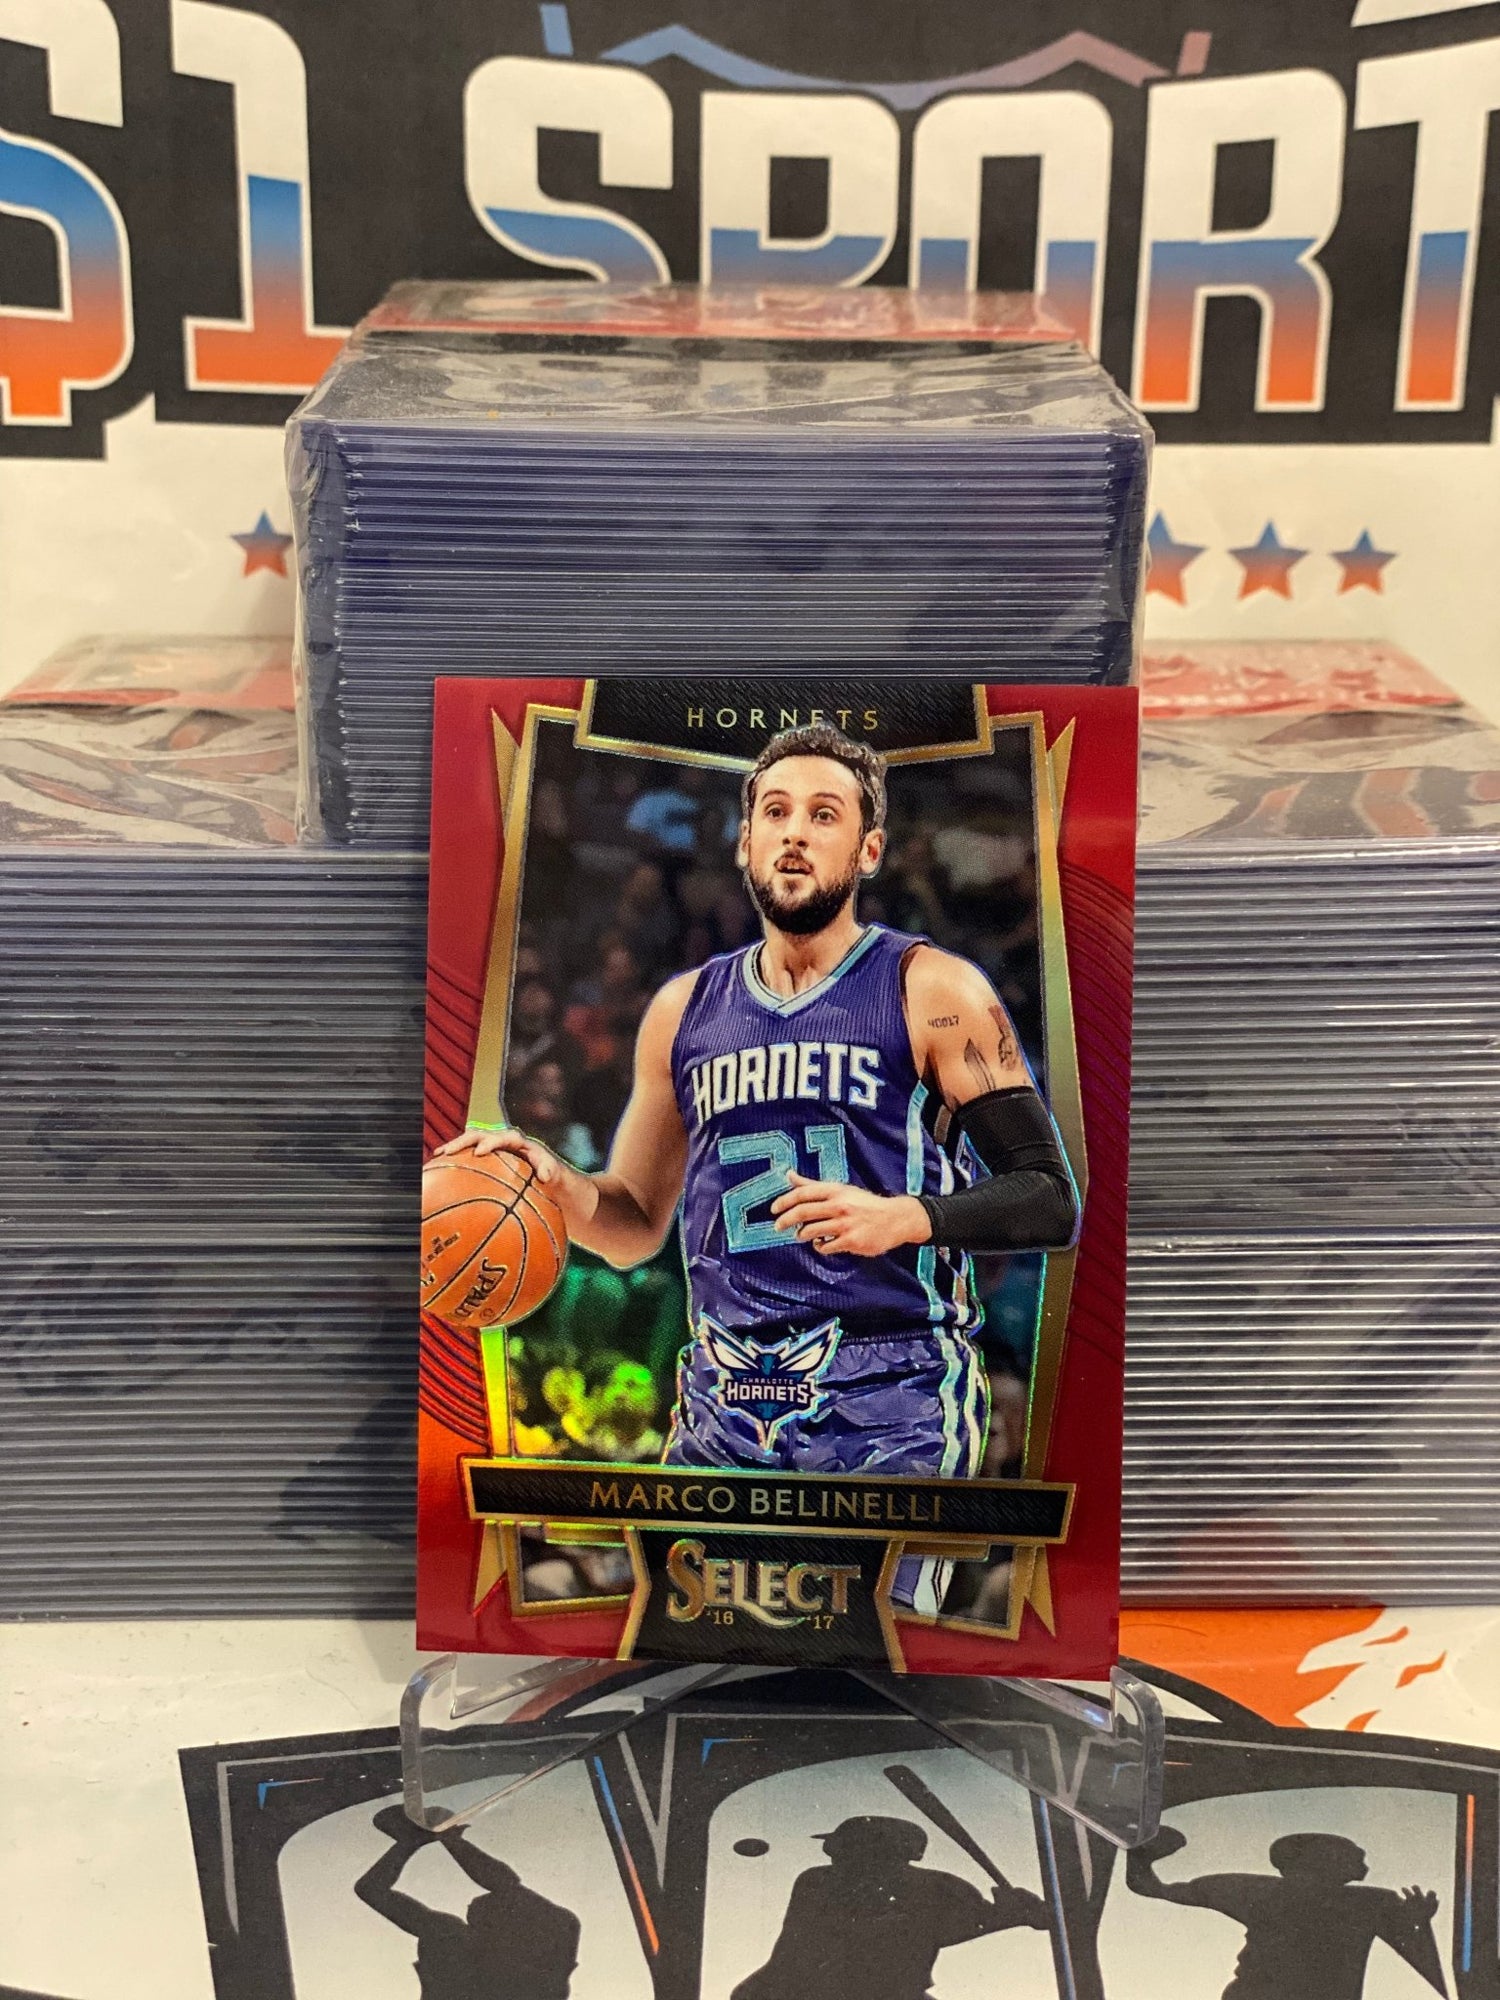 2016 Panini Select (Red Prizm 158/175) Marco Belinelli #76